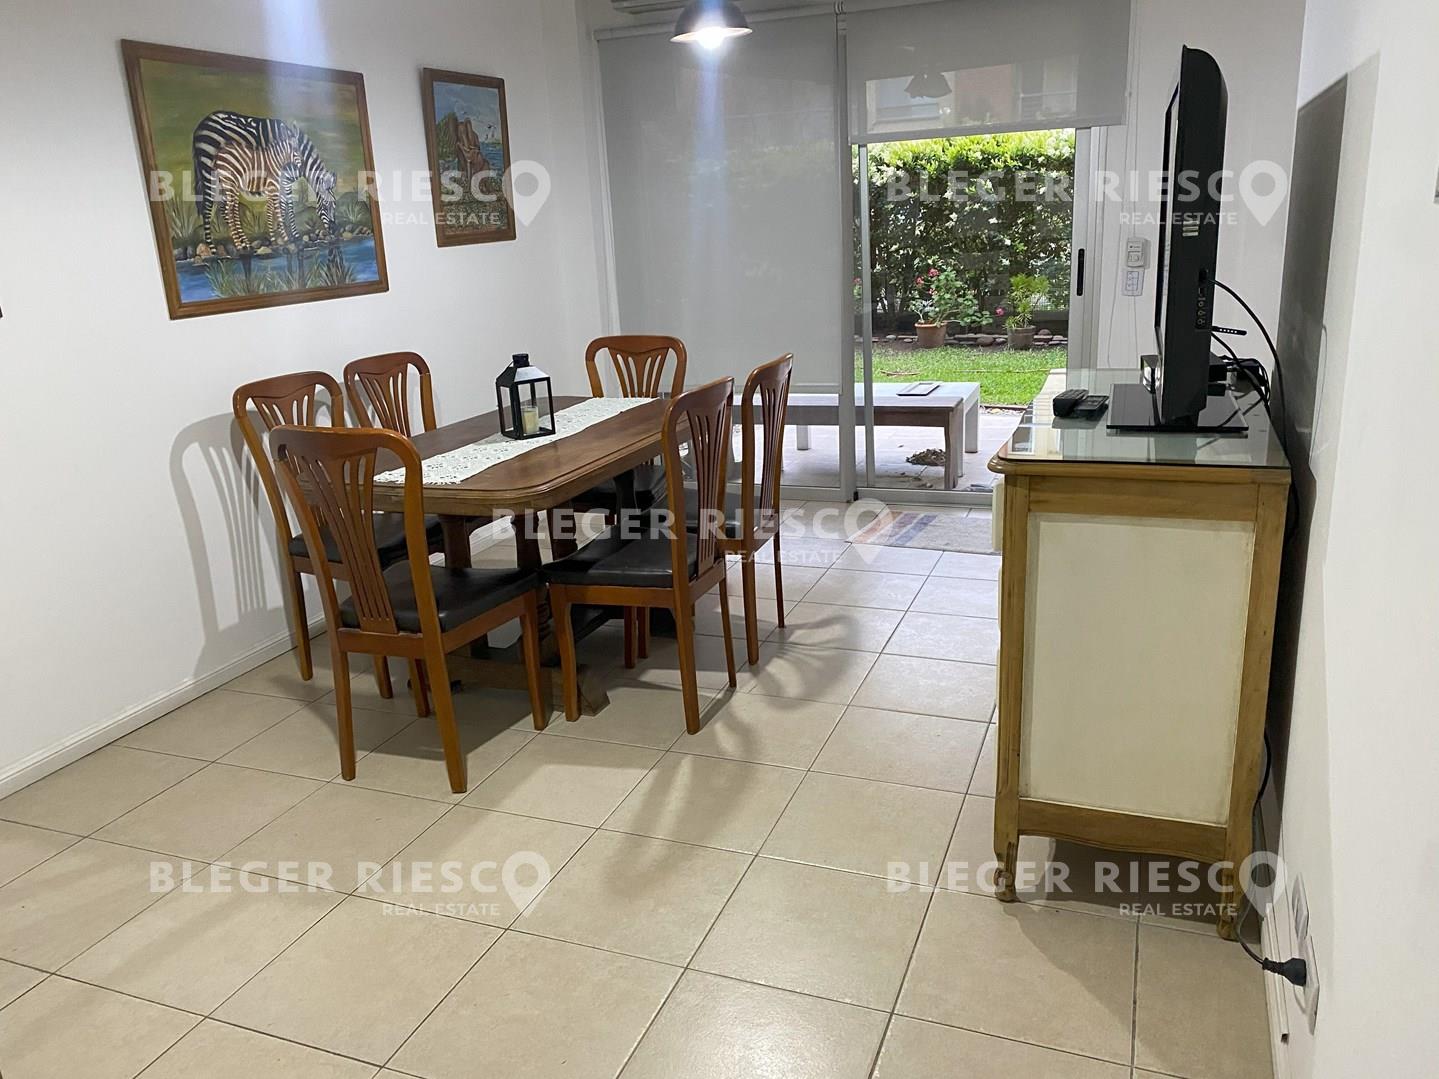 #4785080 | Temporary Rental | Apartment | Portezuelo (Bleger-Riesco Real State)